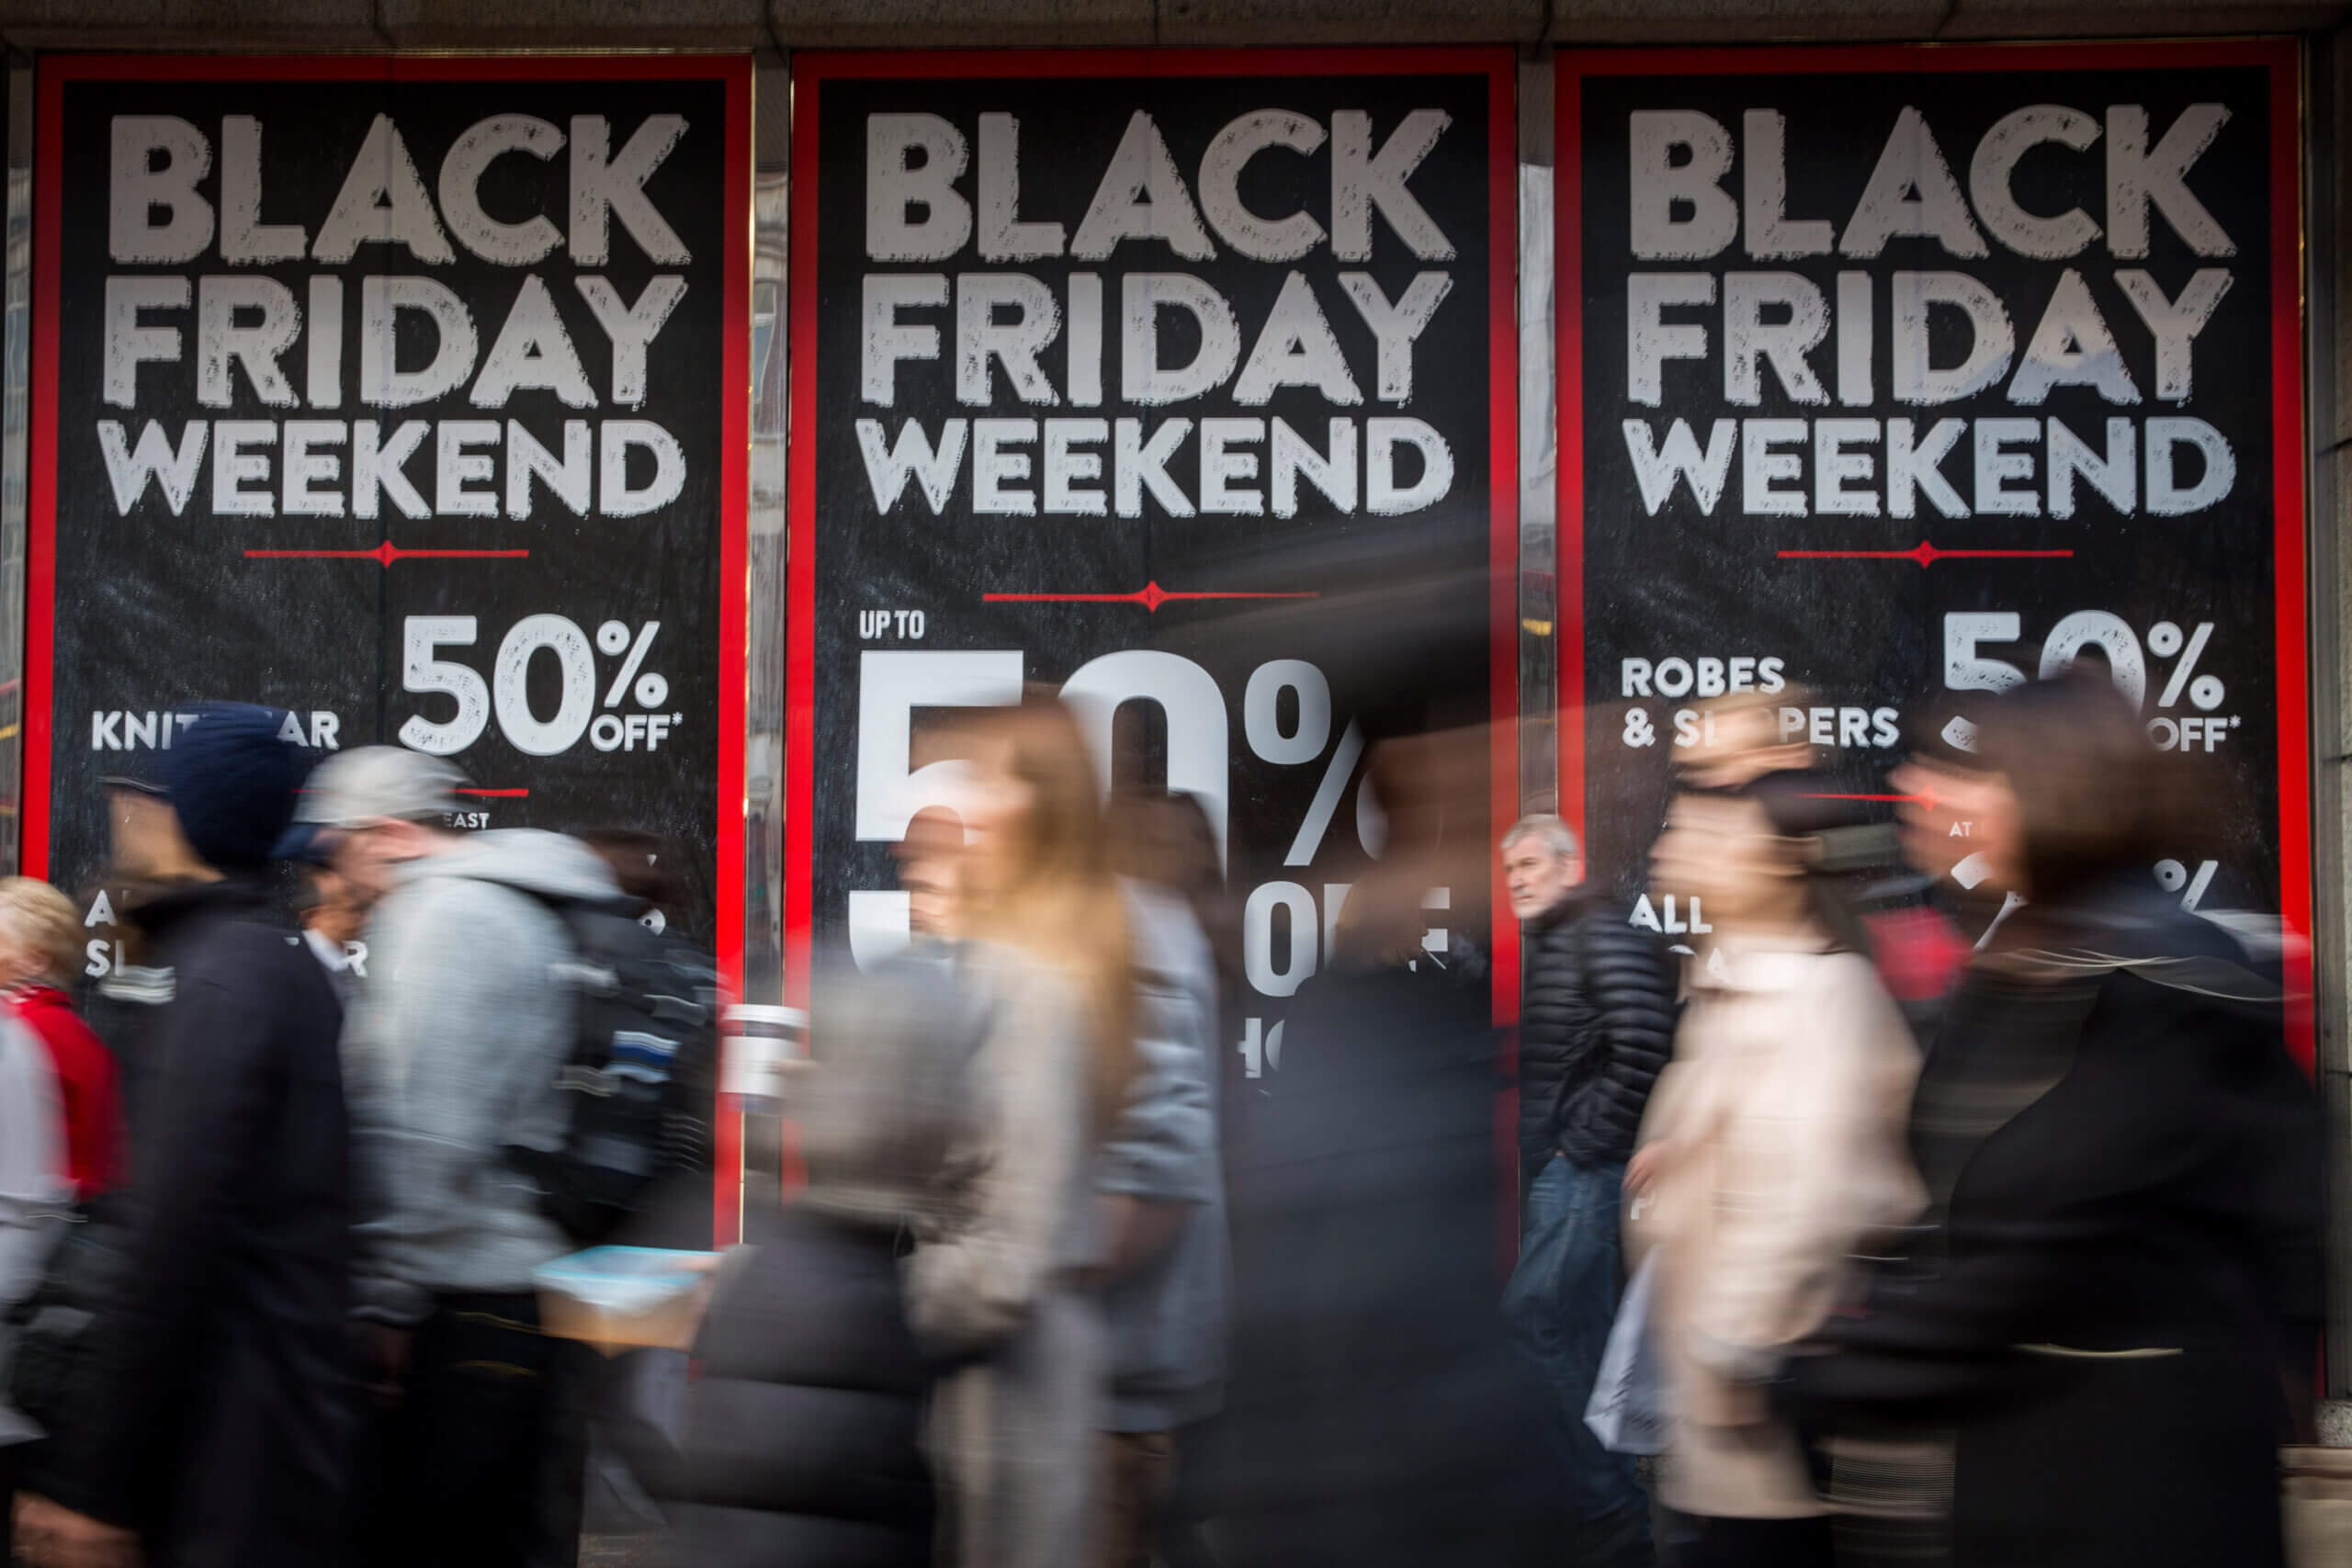 https://liquidity-provider.com/app/uploads/2021/11/when-is-black-friday-2021-and-how-do-you-get-the-best-deals-in-the-uk-scaled-1.jpeg